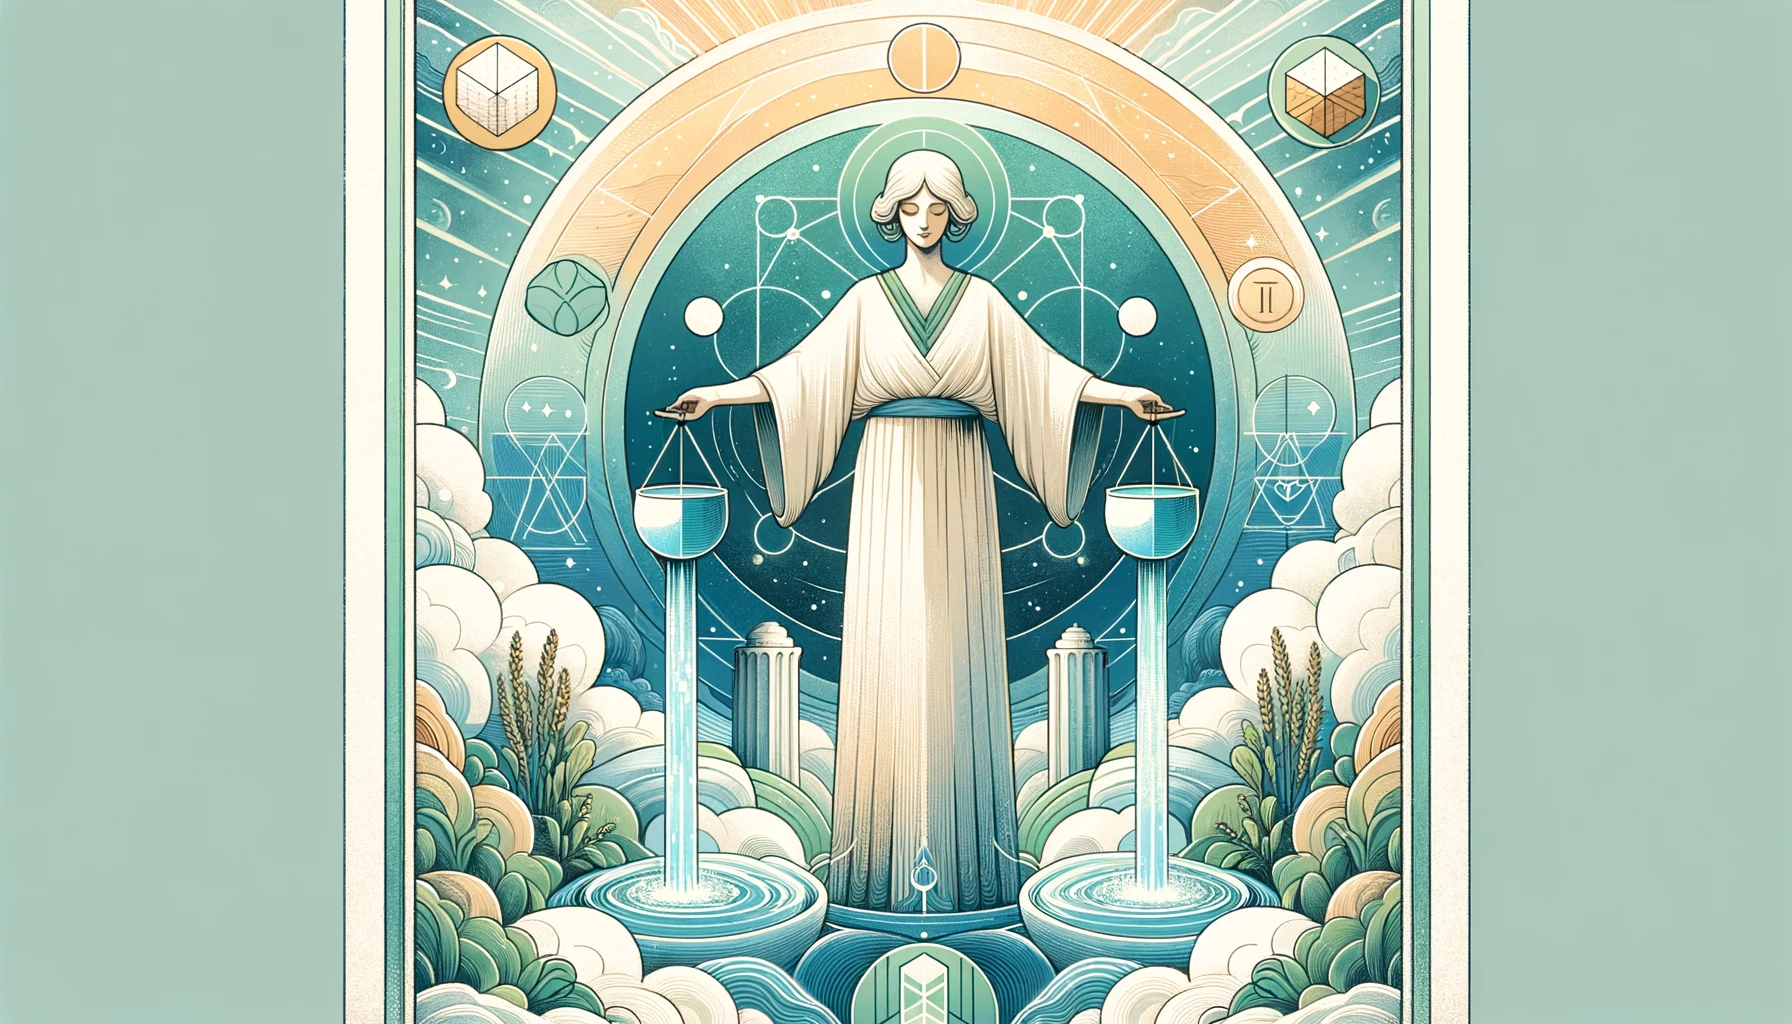 "The figure of Temperance stands in serenity amidst balanced elements, symbolizing the integration and harmony of life's facets. Soft blues, greens, and whites convey a tranquil, purifying, and healing ambiance."